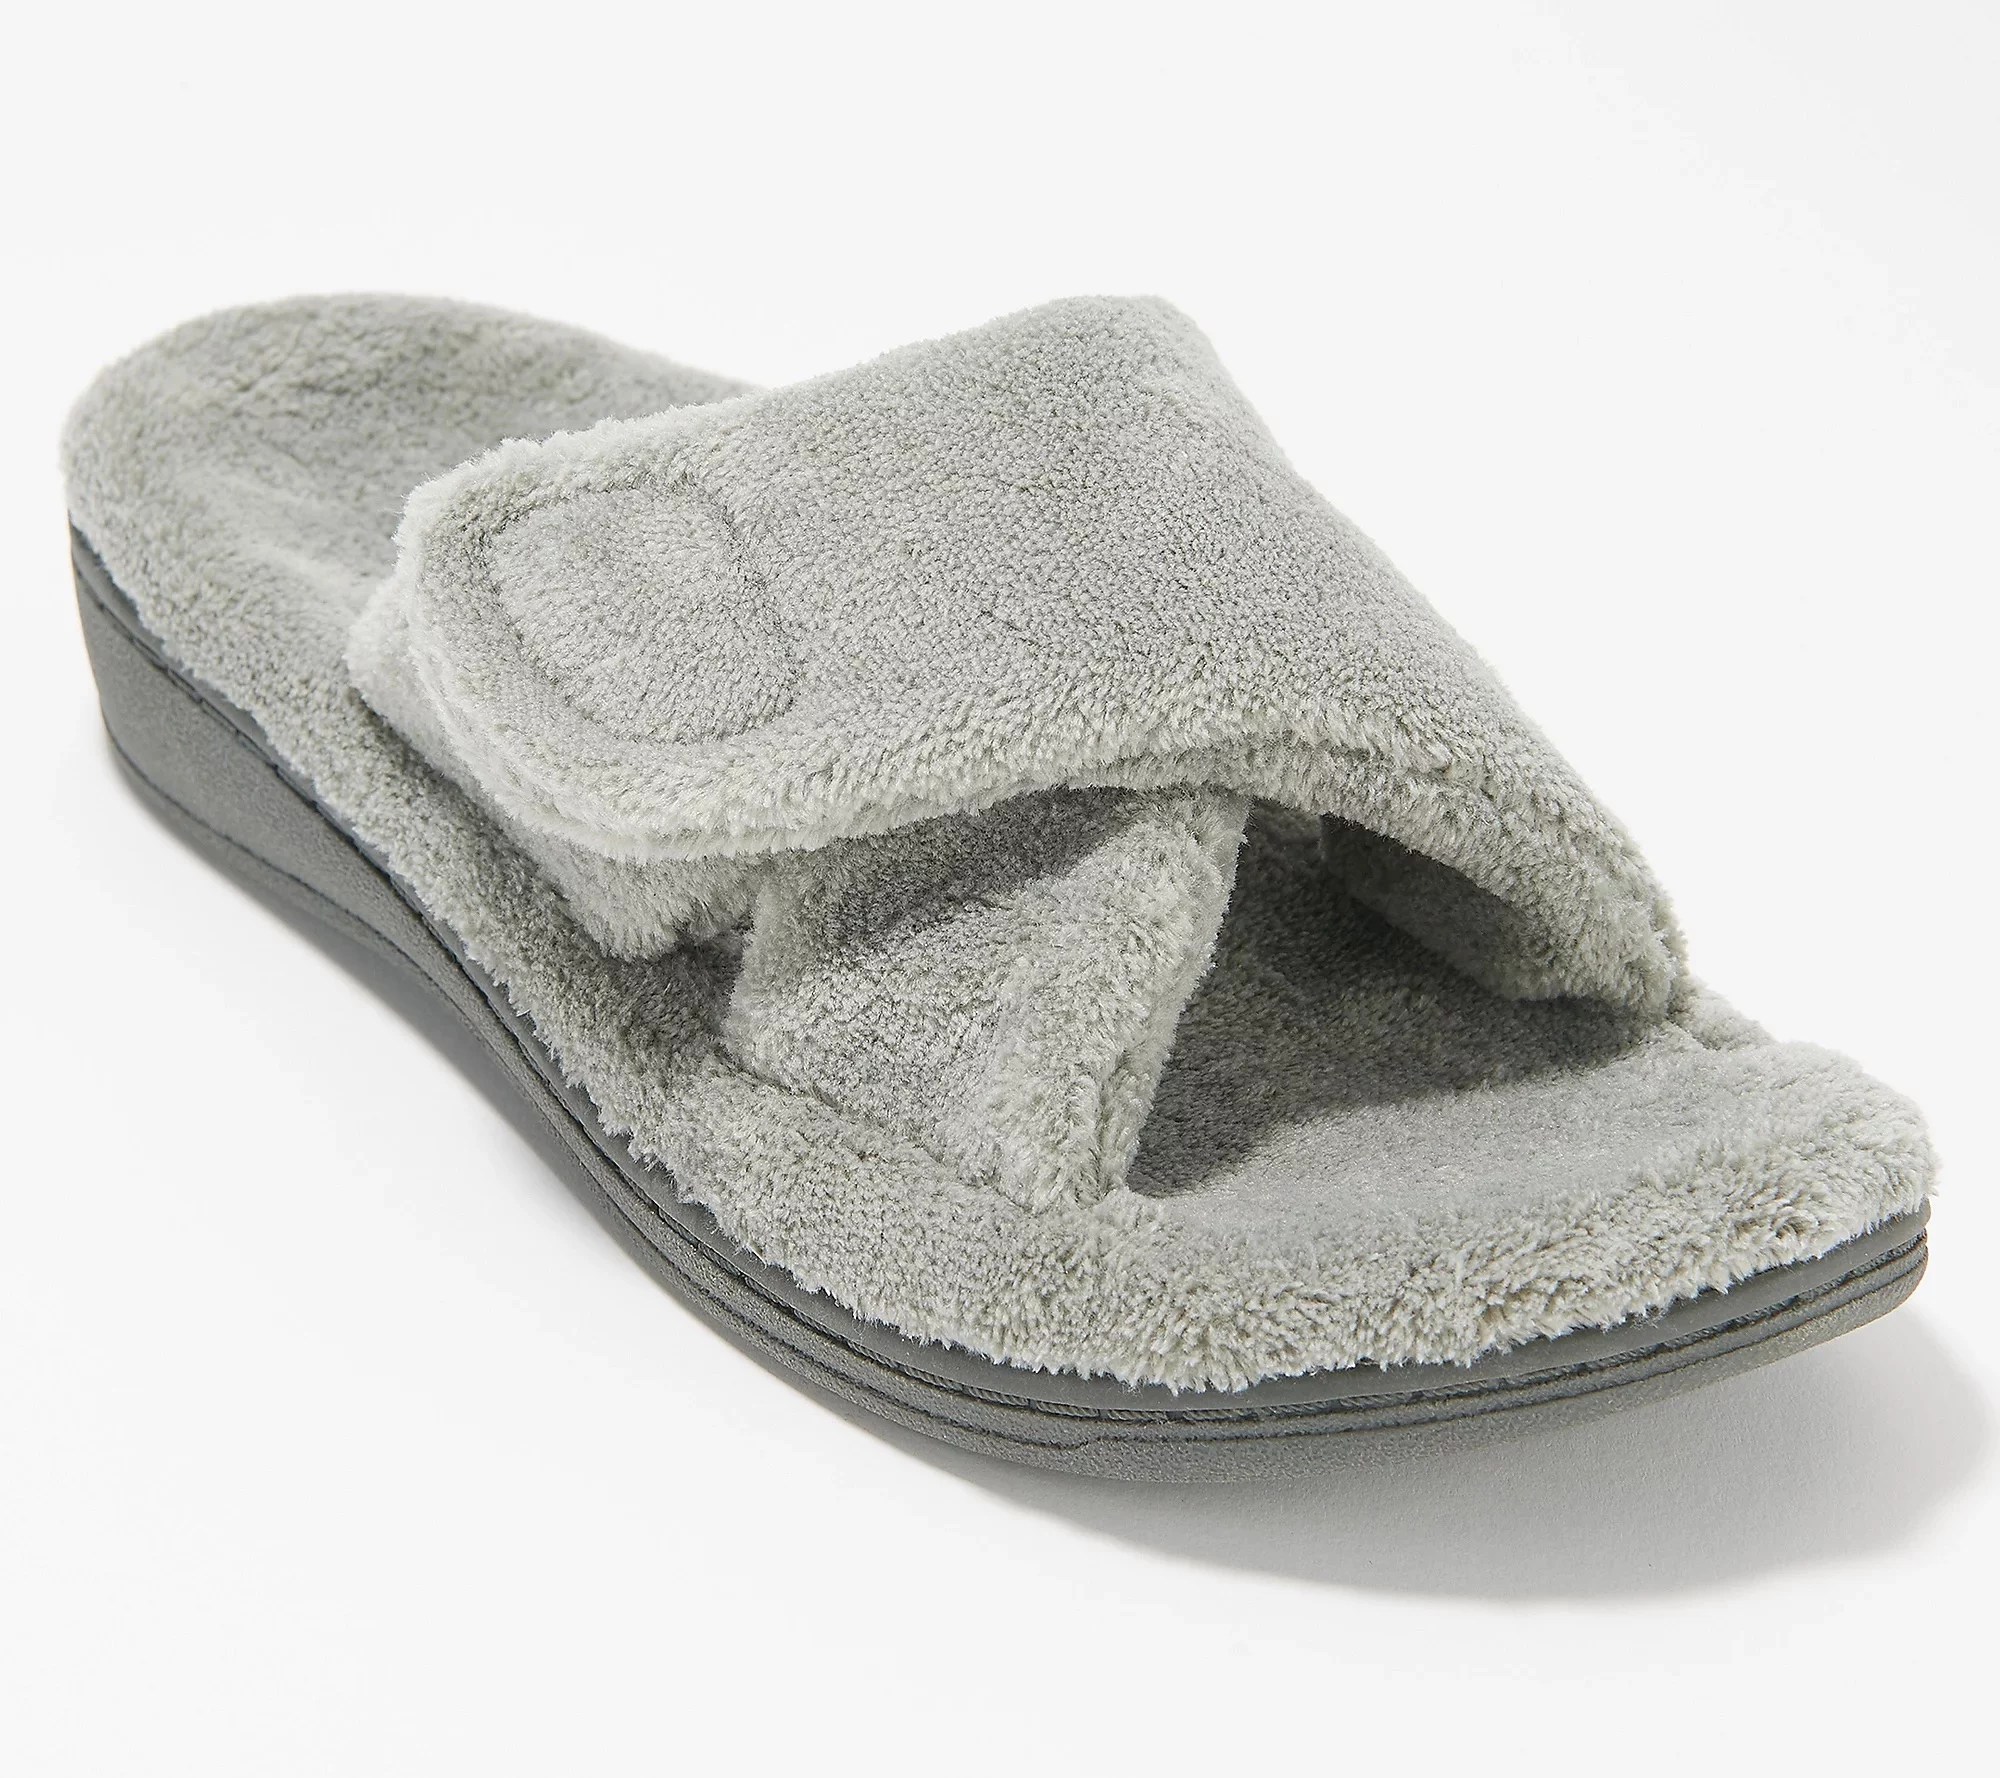 Vionic Relax Adjustable Strap Slippers